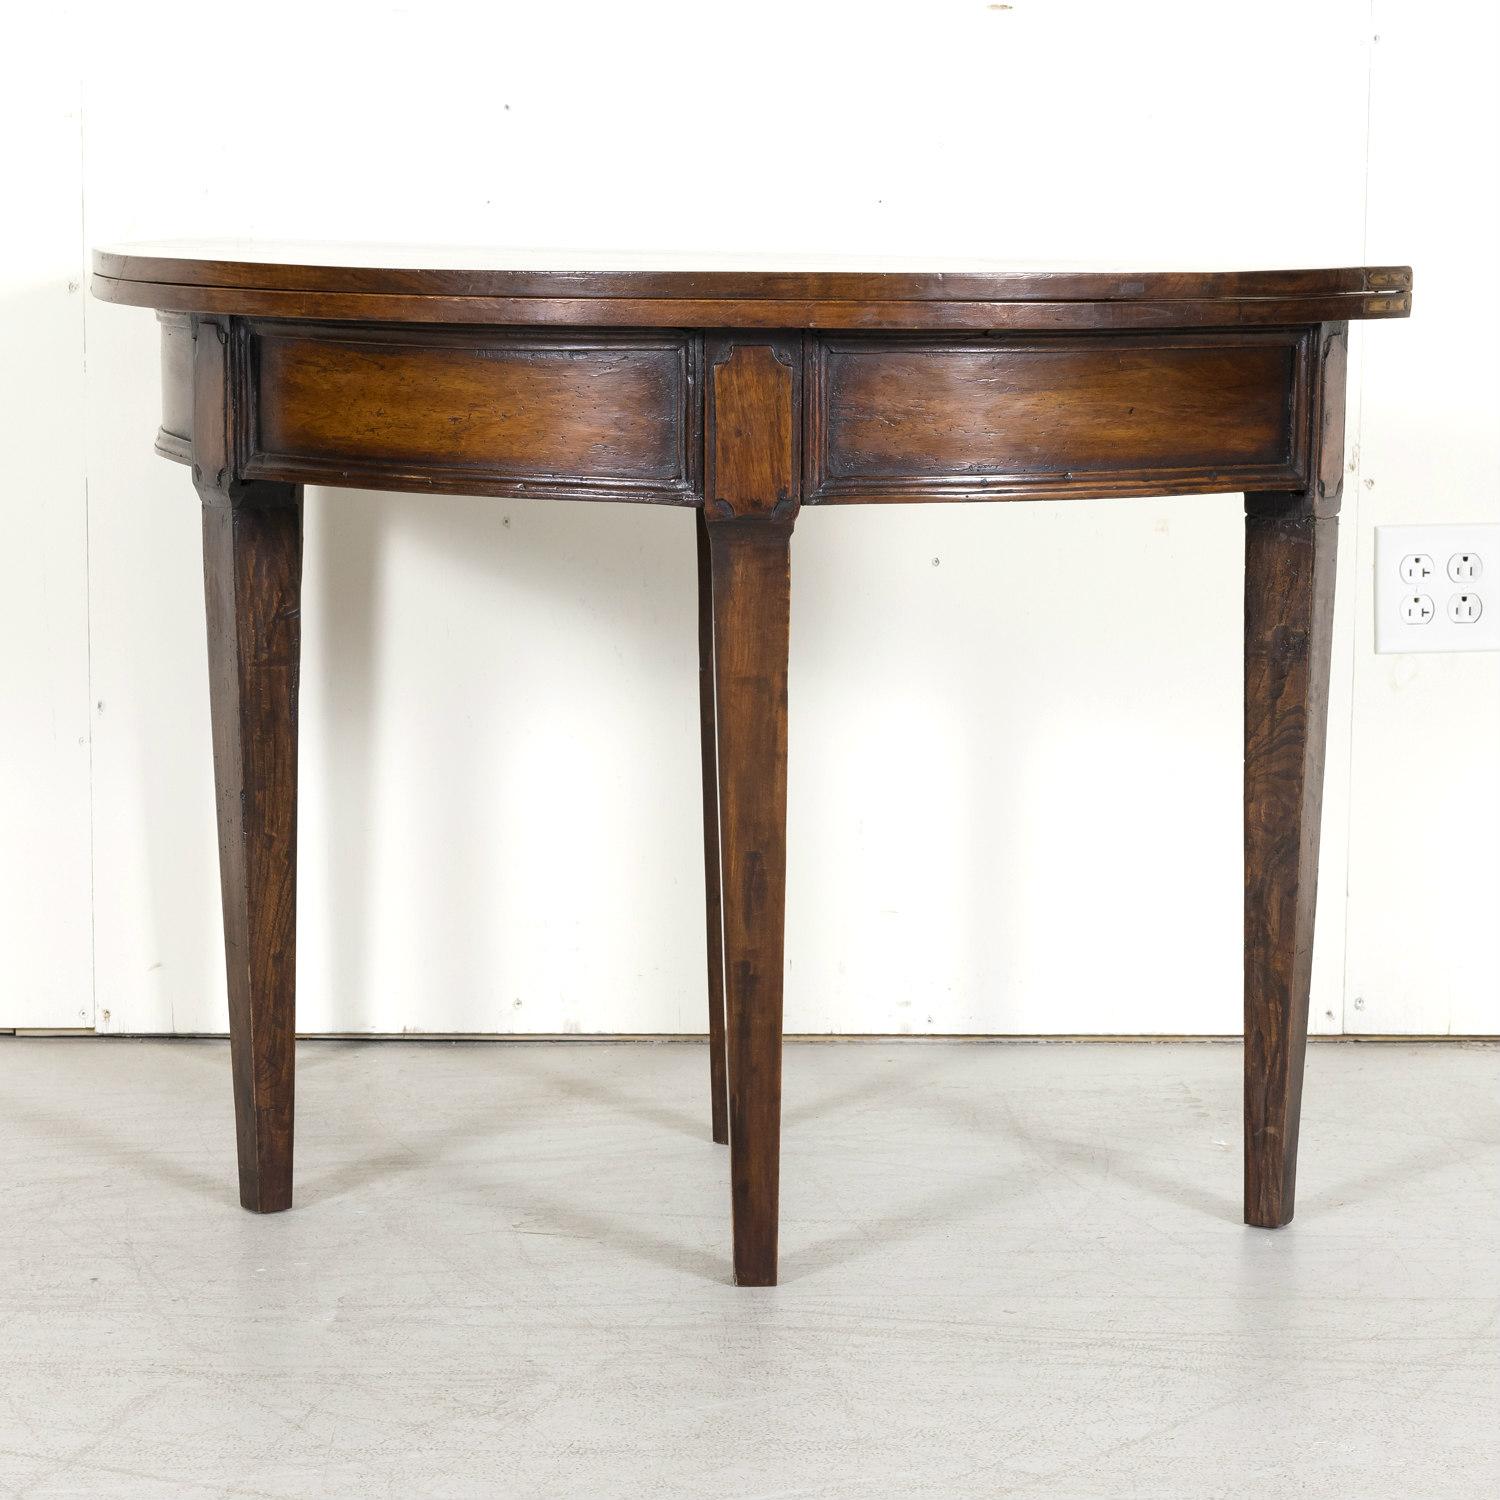 19th Century French Louis XVI Style Walnut Demilune Wall Console or Side Table For Sale 4